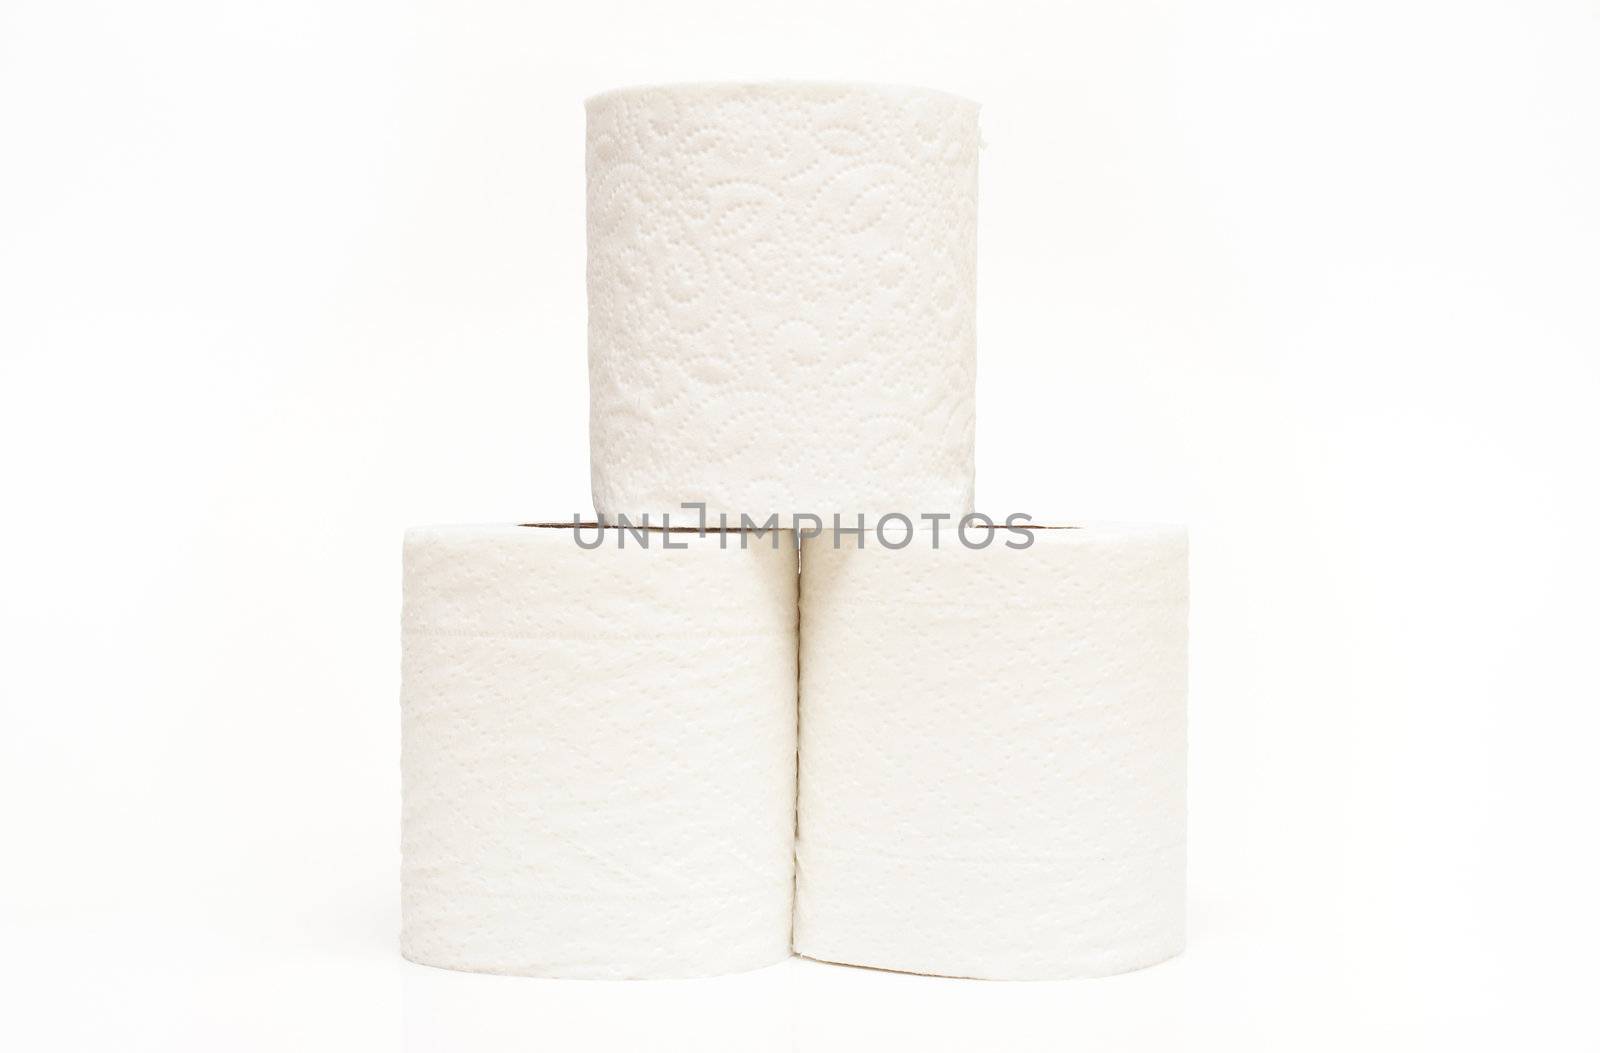 A stack of three rolls of toilet paper.